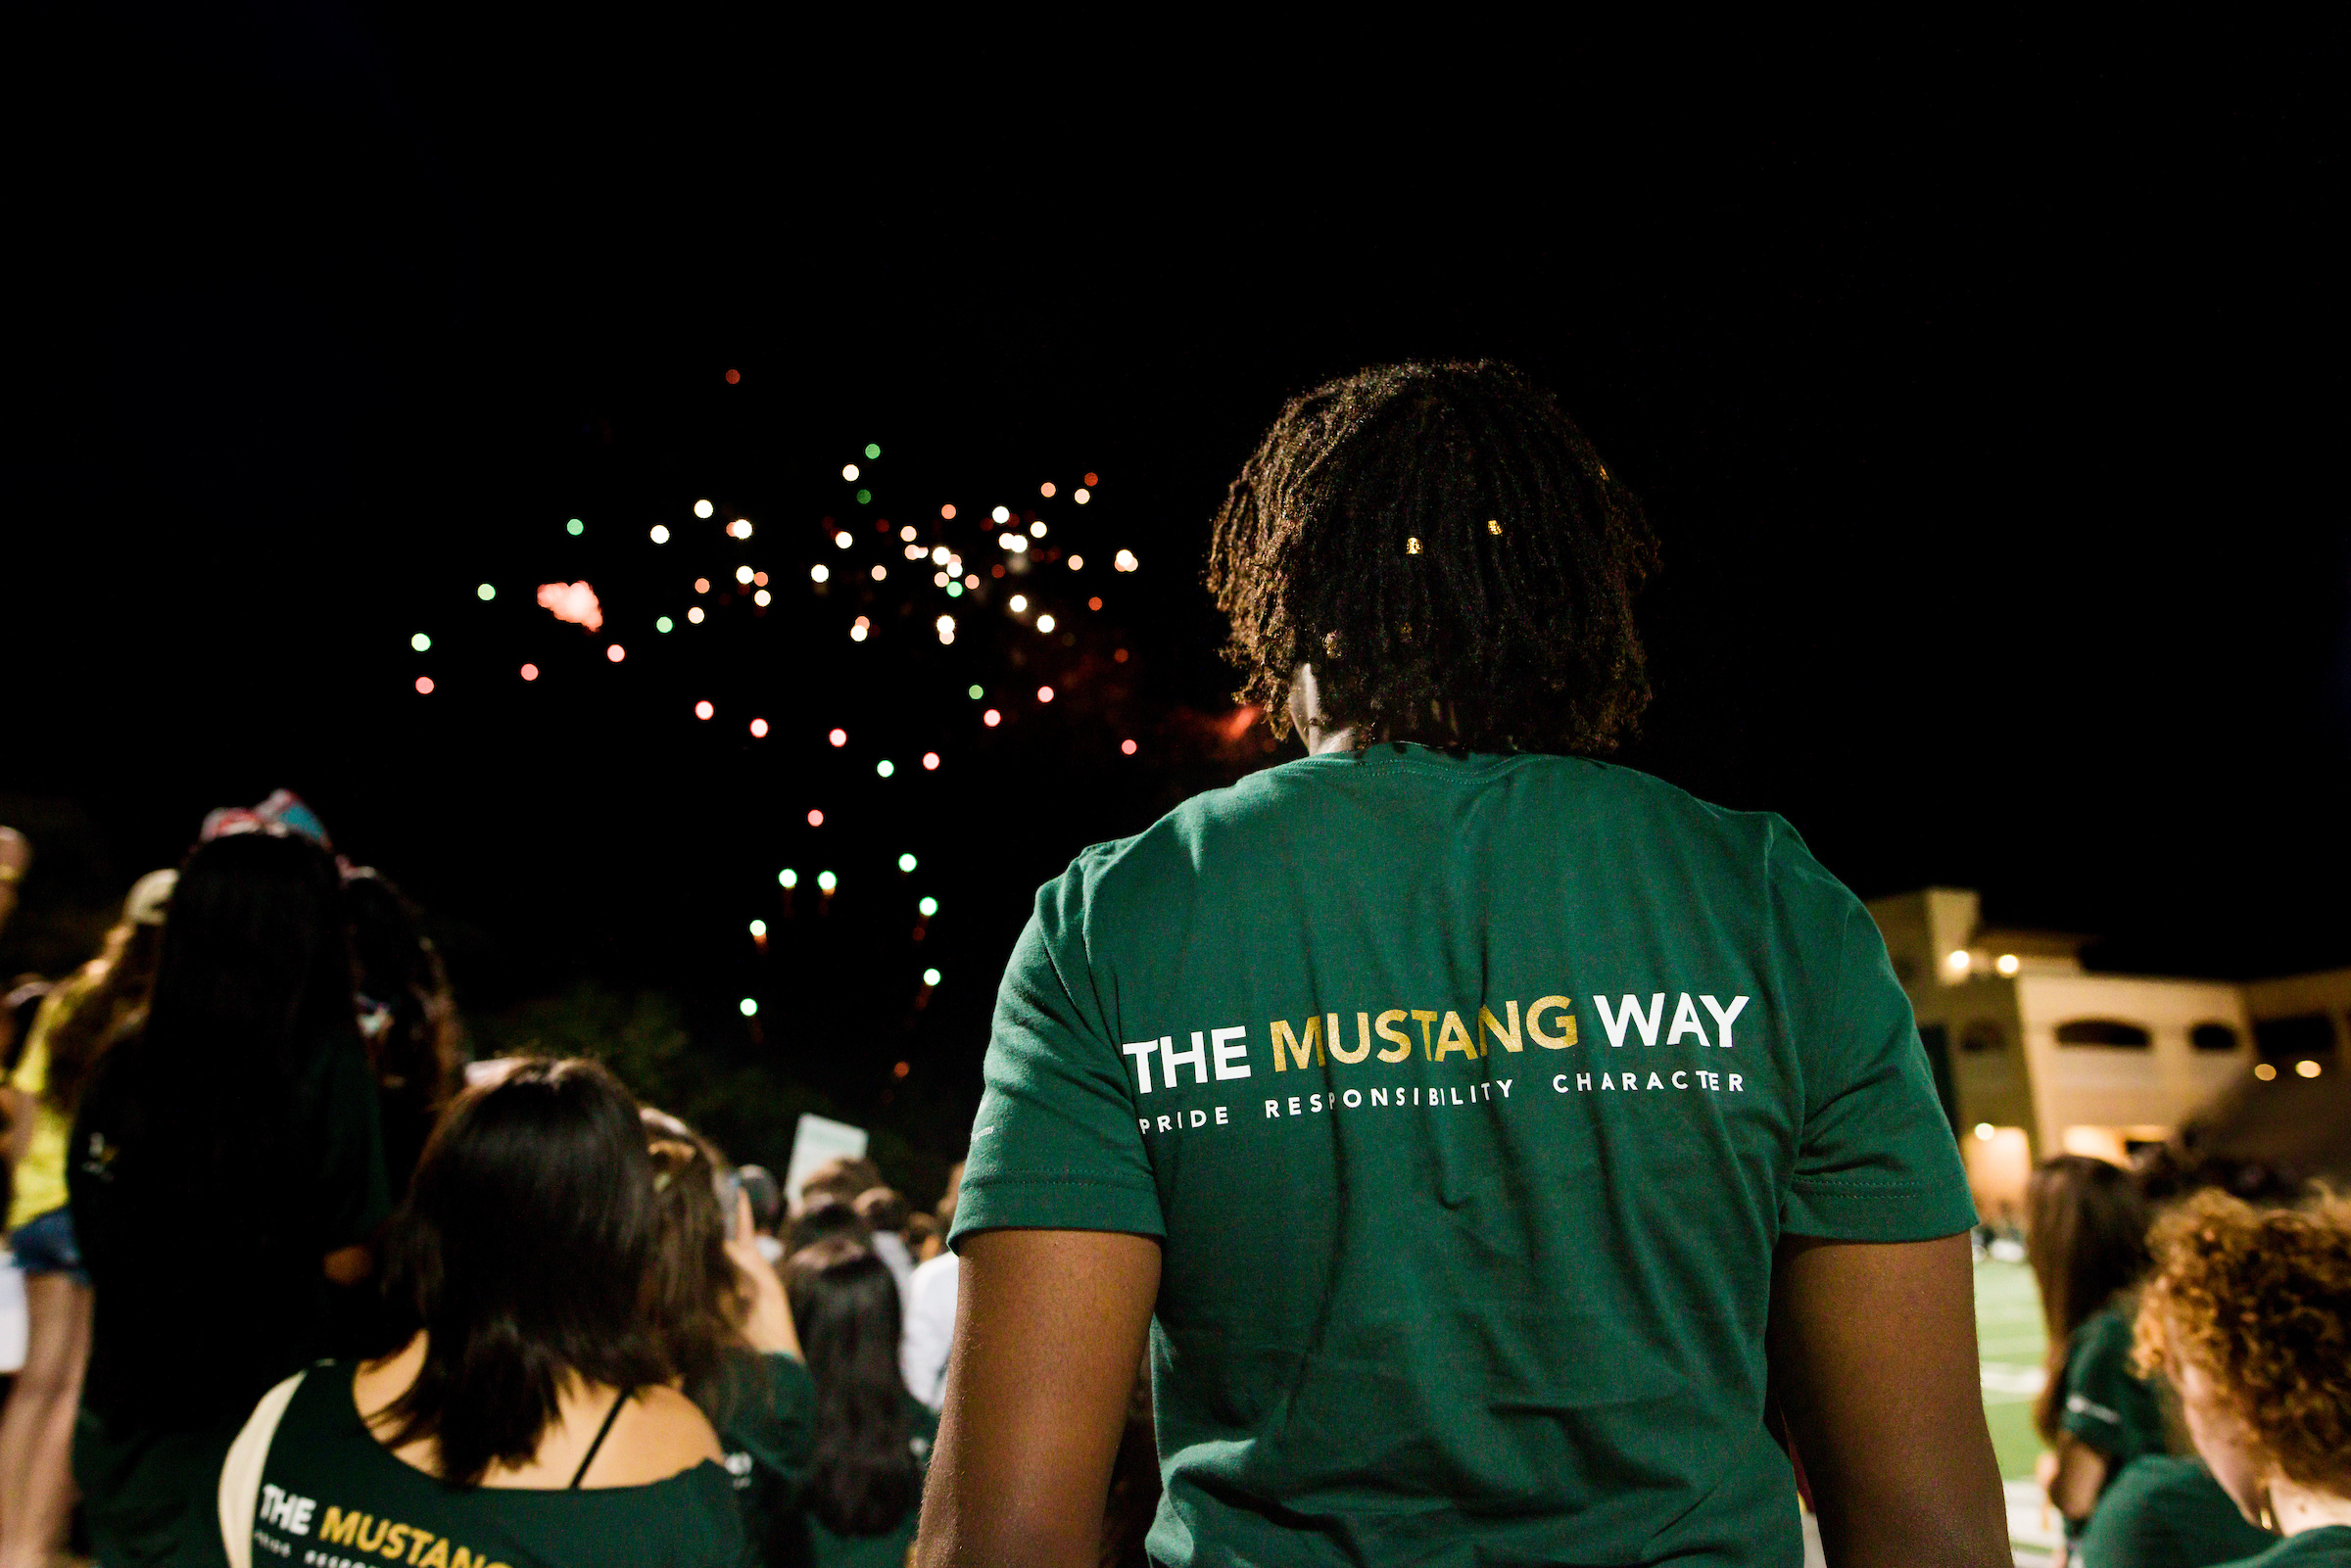 Students look up at a fireworks display above Spanos Stadium. The student in the foreground, whose back is to the camera, is wearing a green shirt that says The Mustang Way across the top.